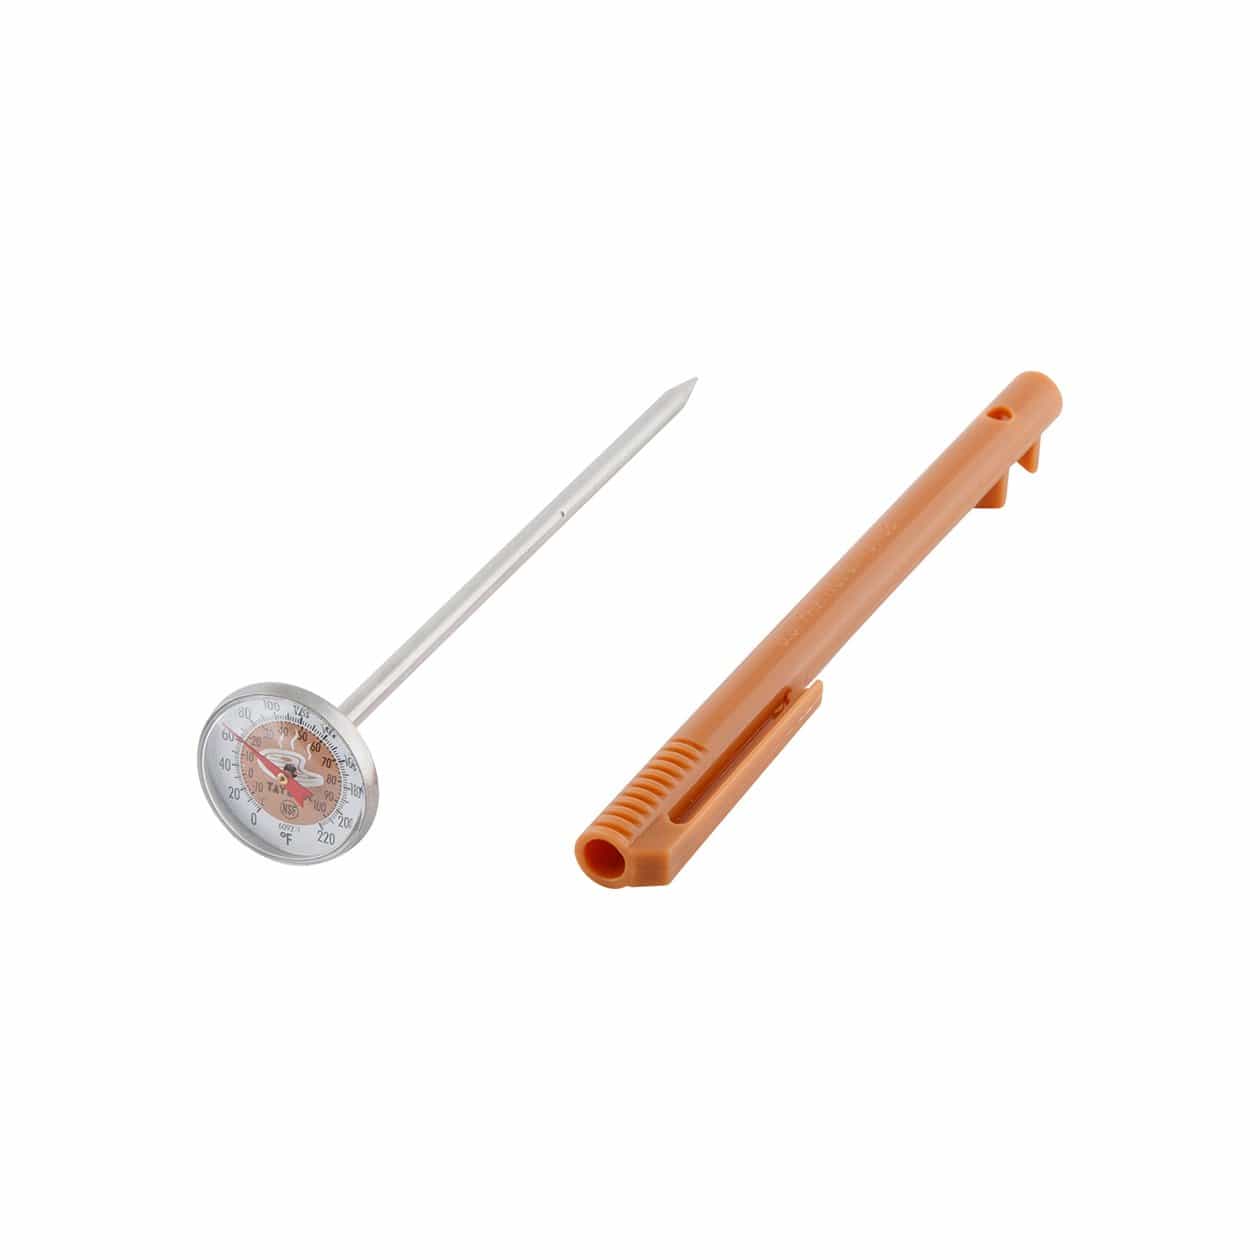 Solid-stem thermometer with stainless steel pocket